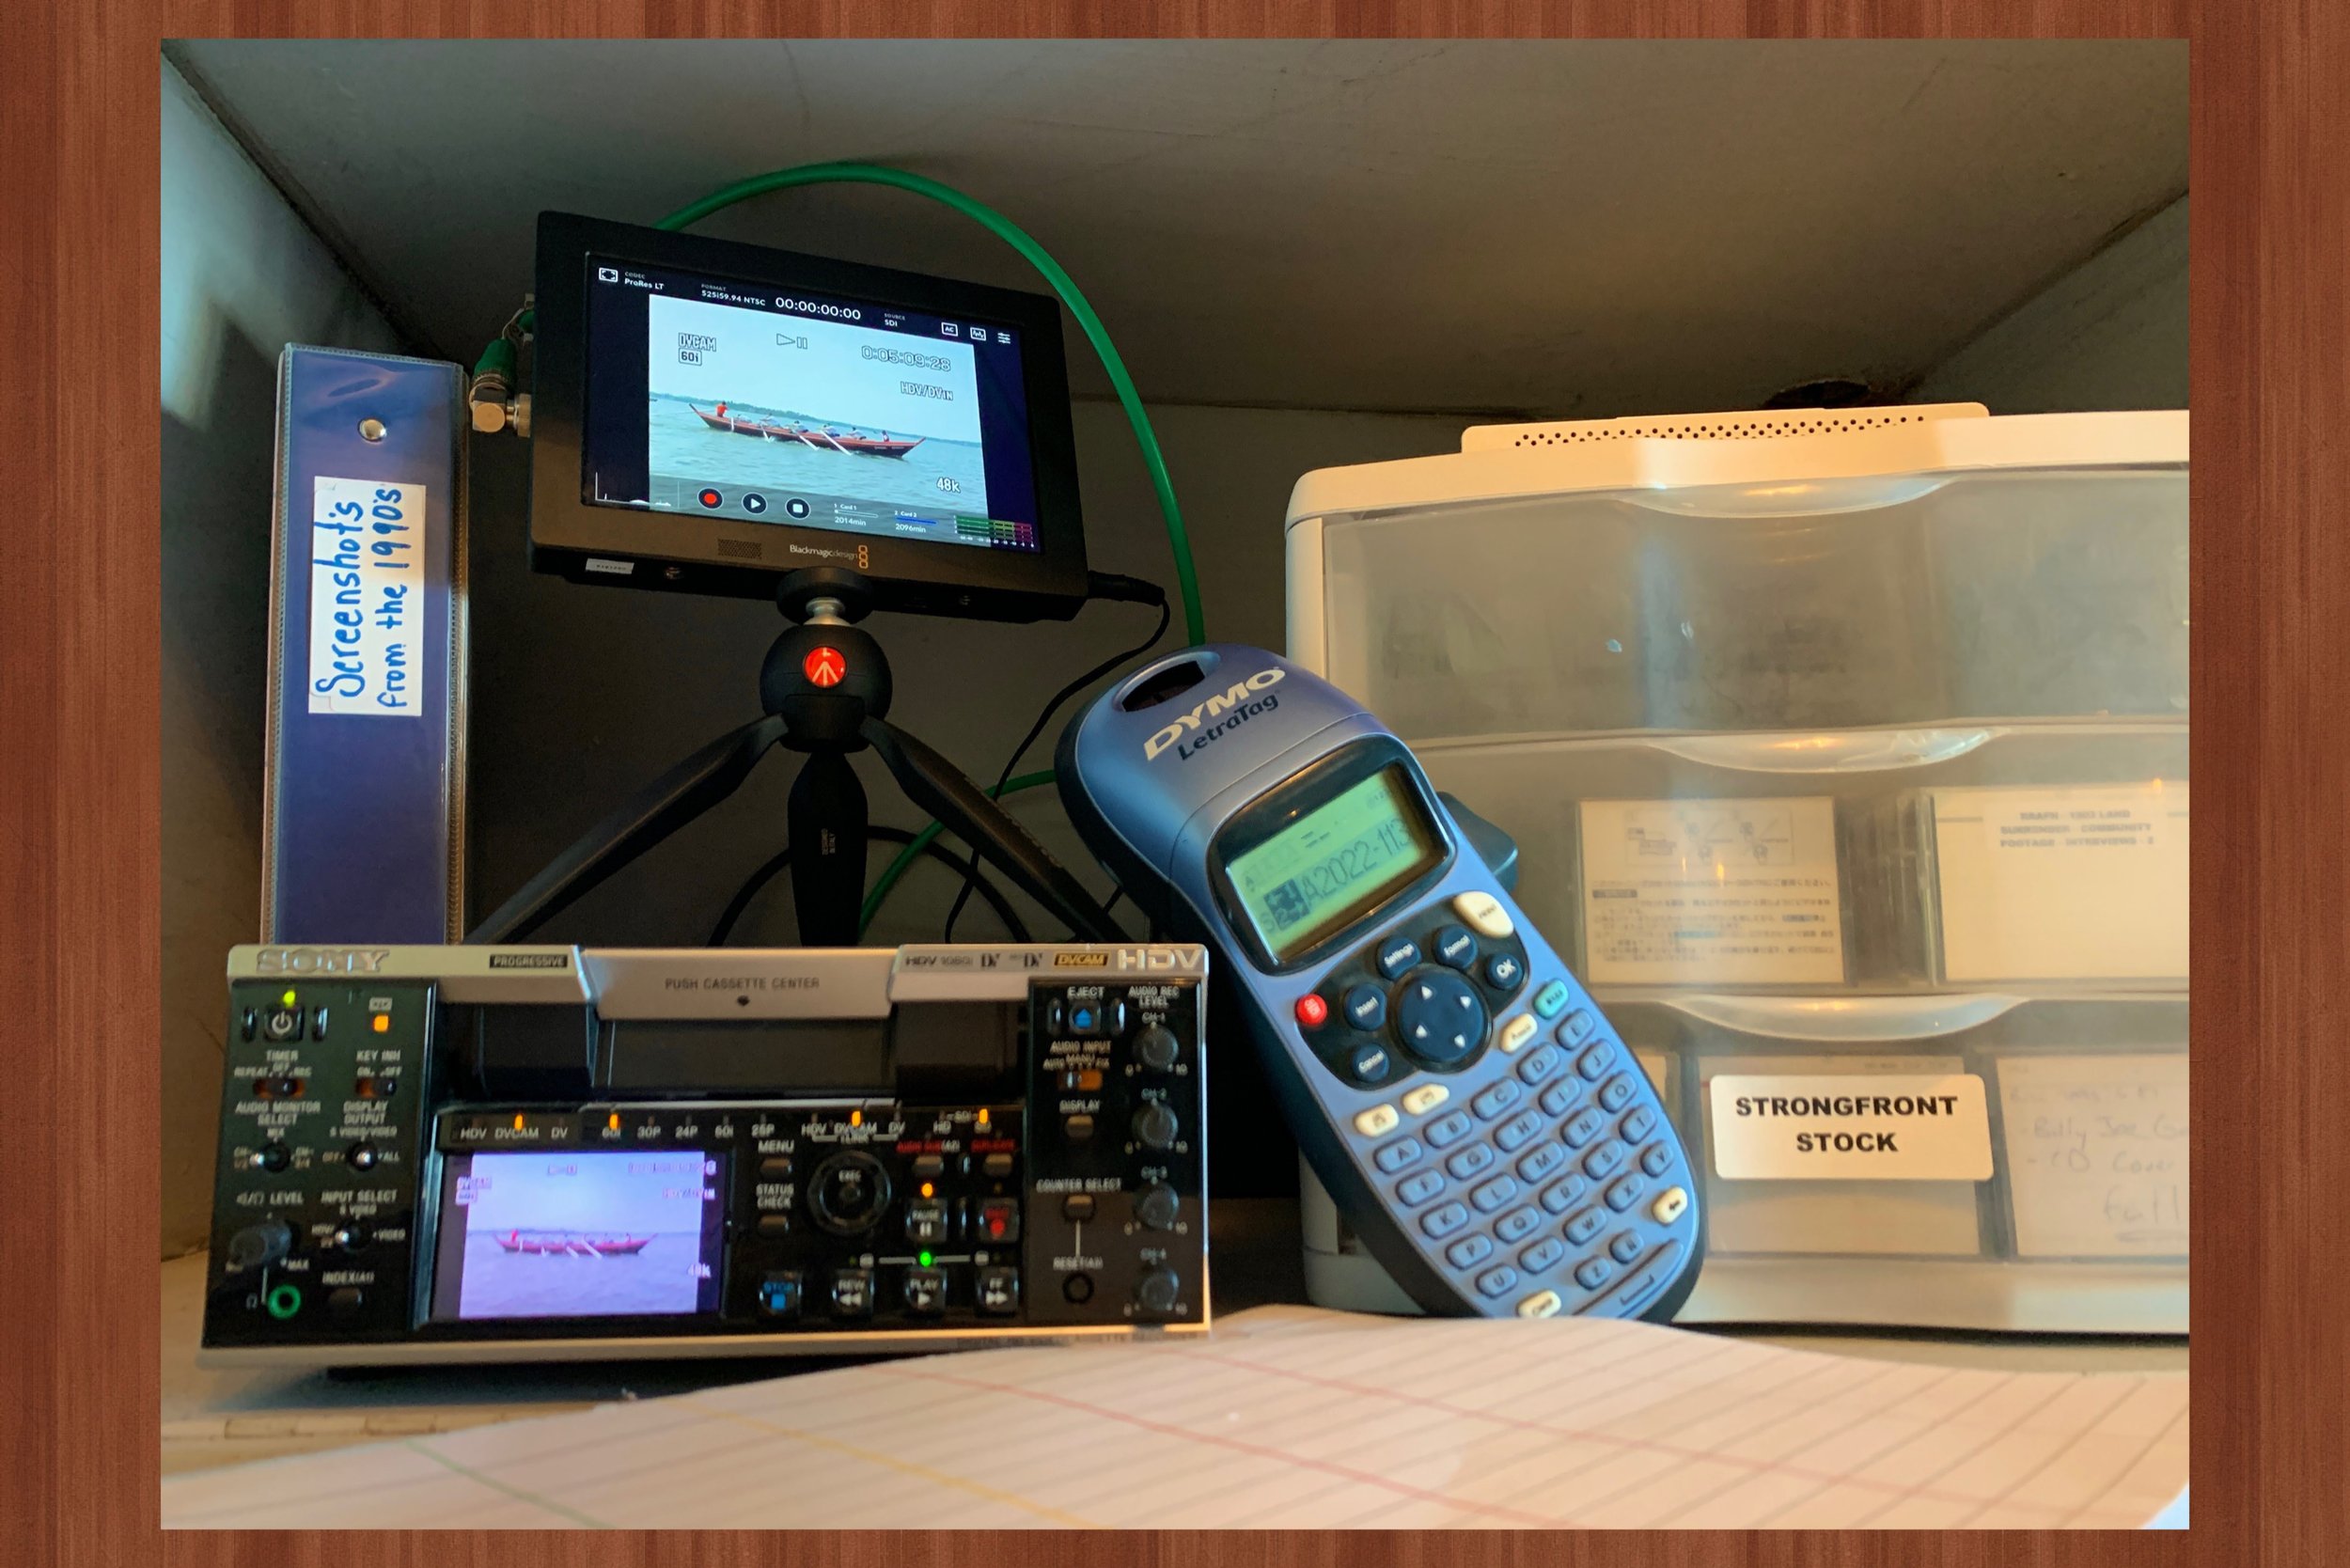  Our small but mighty setup for  Screenshots of the 90’s !    The HDV tape deck was a Cadillac in the day and is now an asset for viewing and digitization.  It has played back hundreds of hours of Mini DV tapes for our video heritage project.&nbsp; 